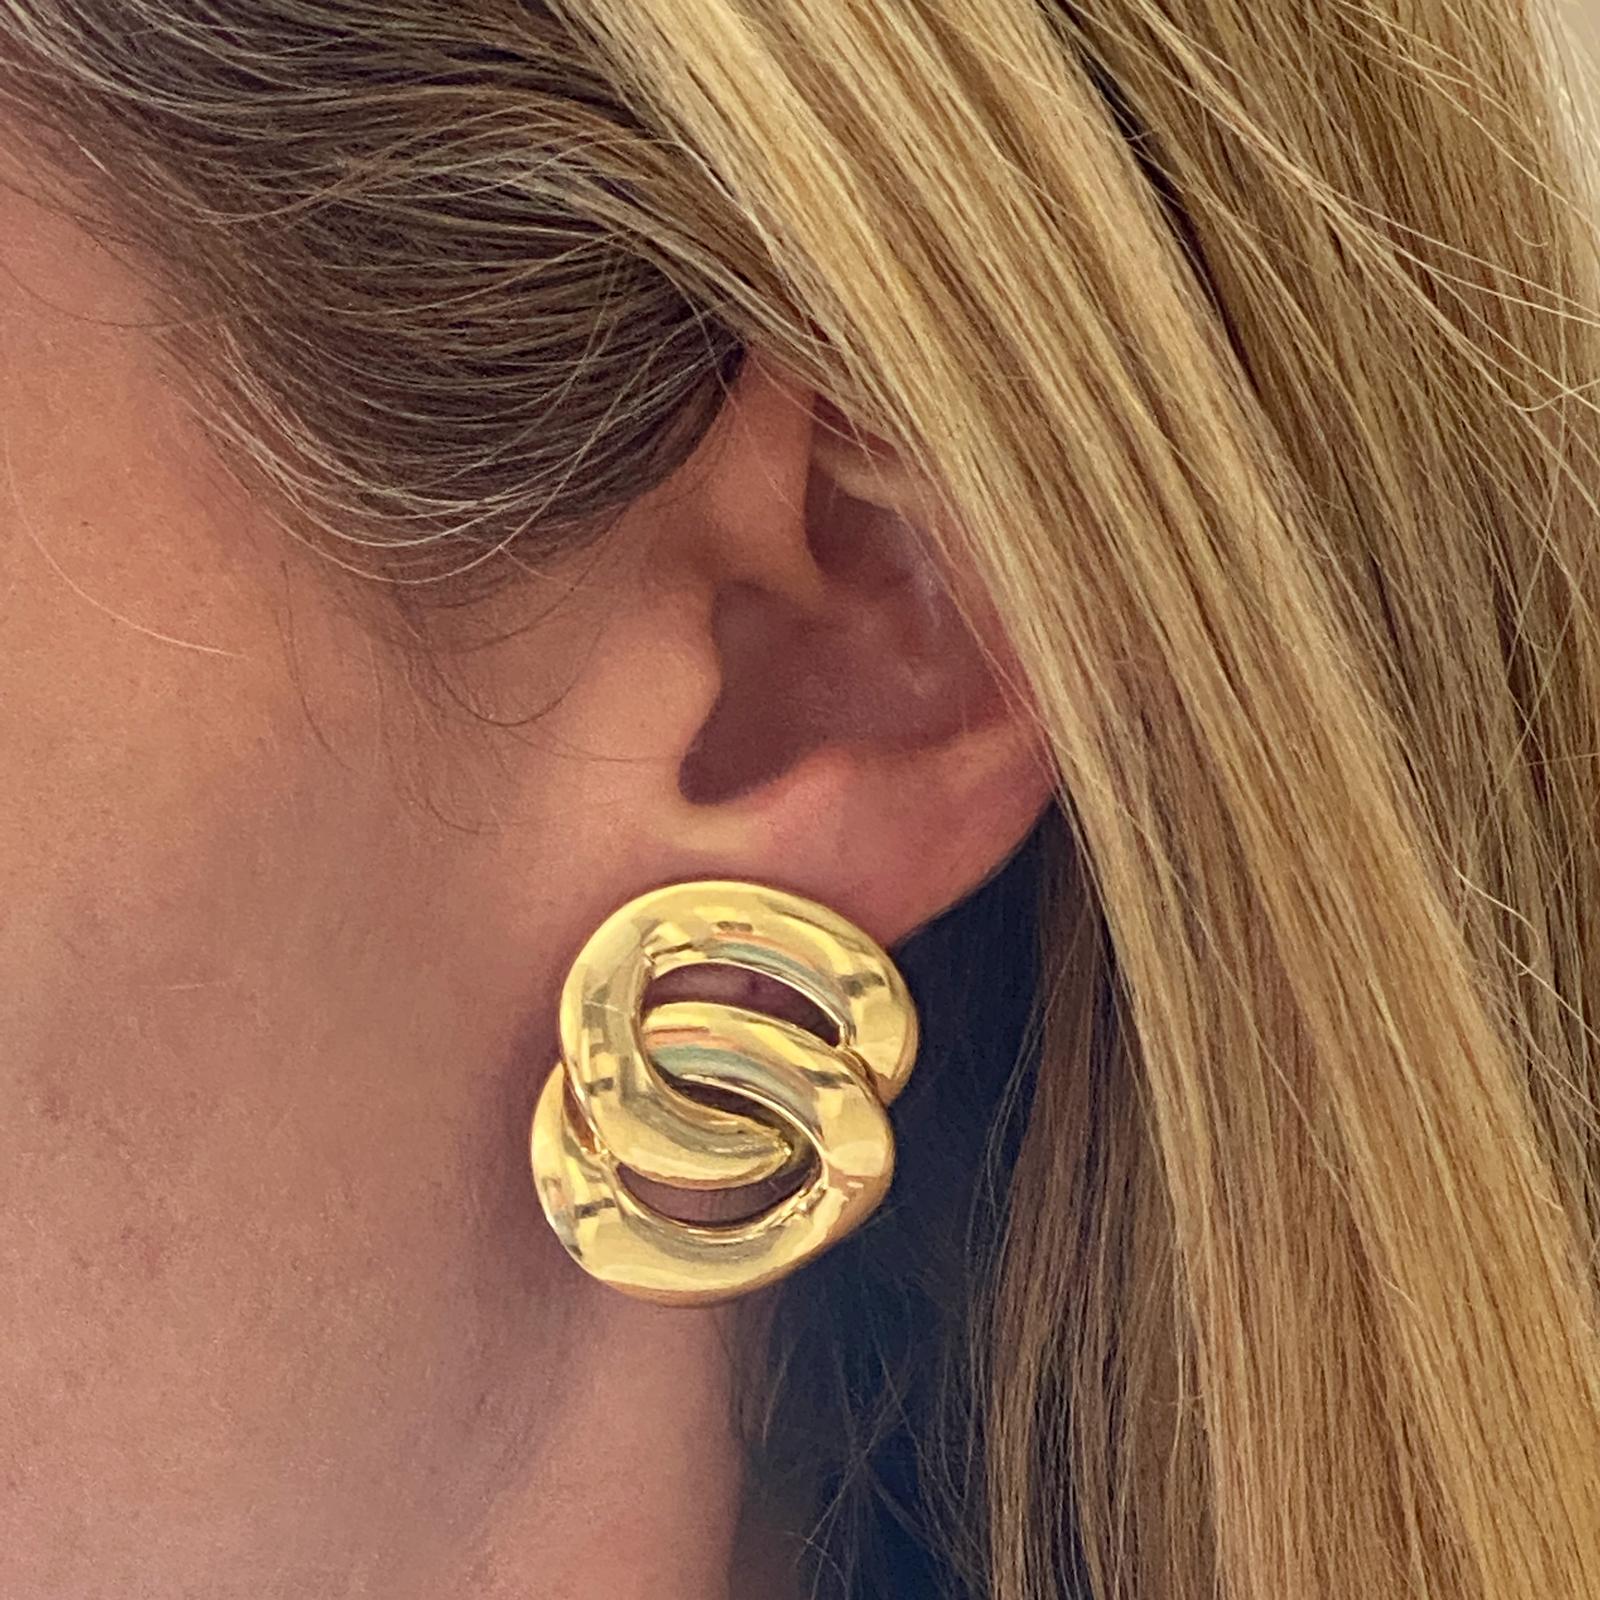 Italian interlocking circle earrings are fashioned in high polish 18 karat yellow gold. The earrings currently have clip lever backs (posts can be added), and measure 1.0 x 1.25 inches. 